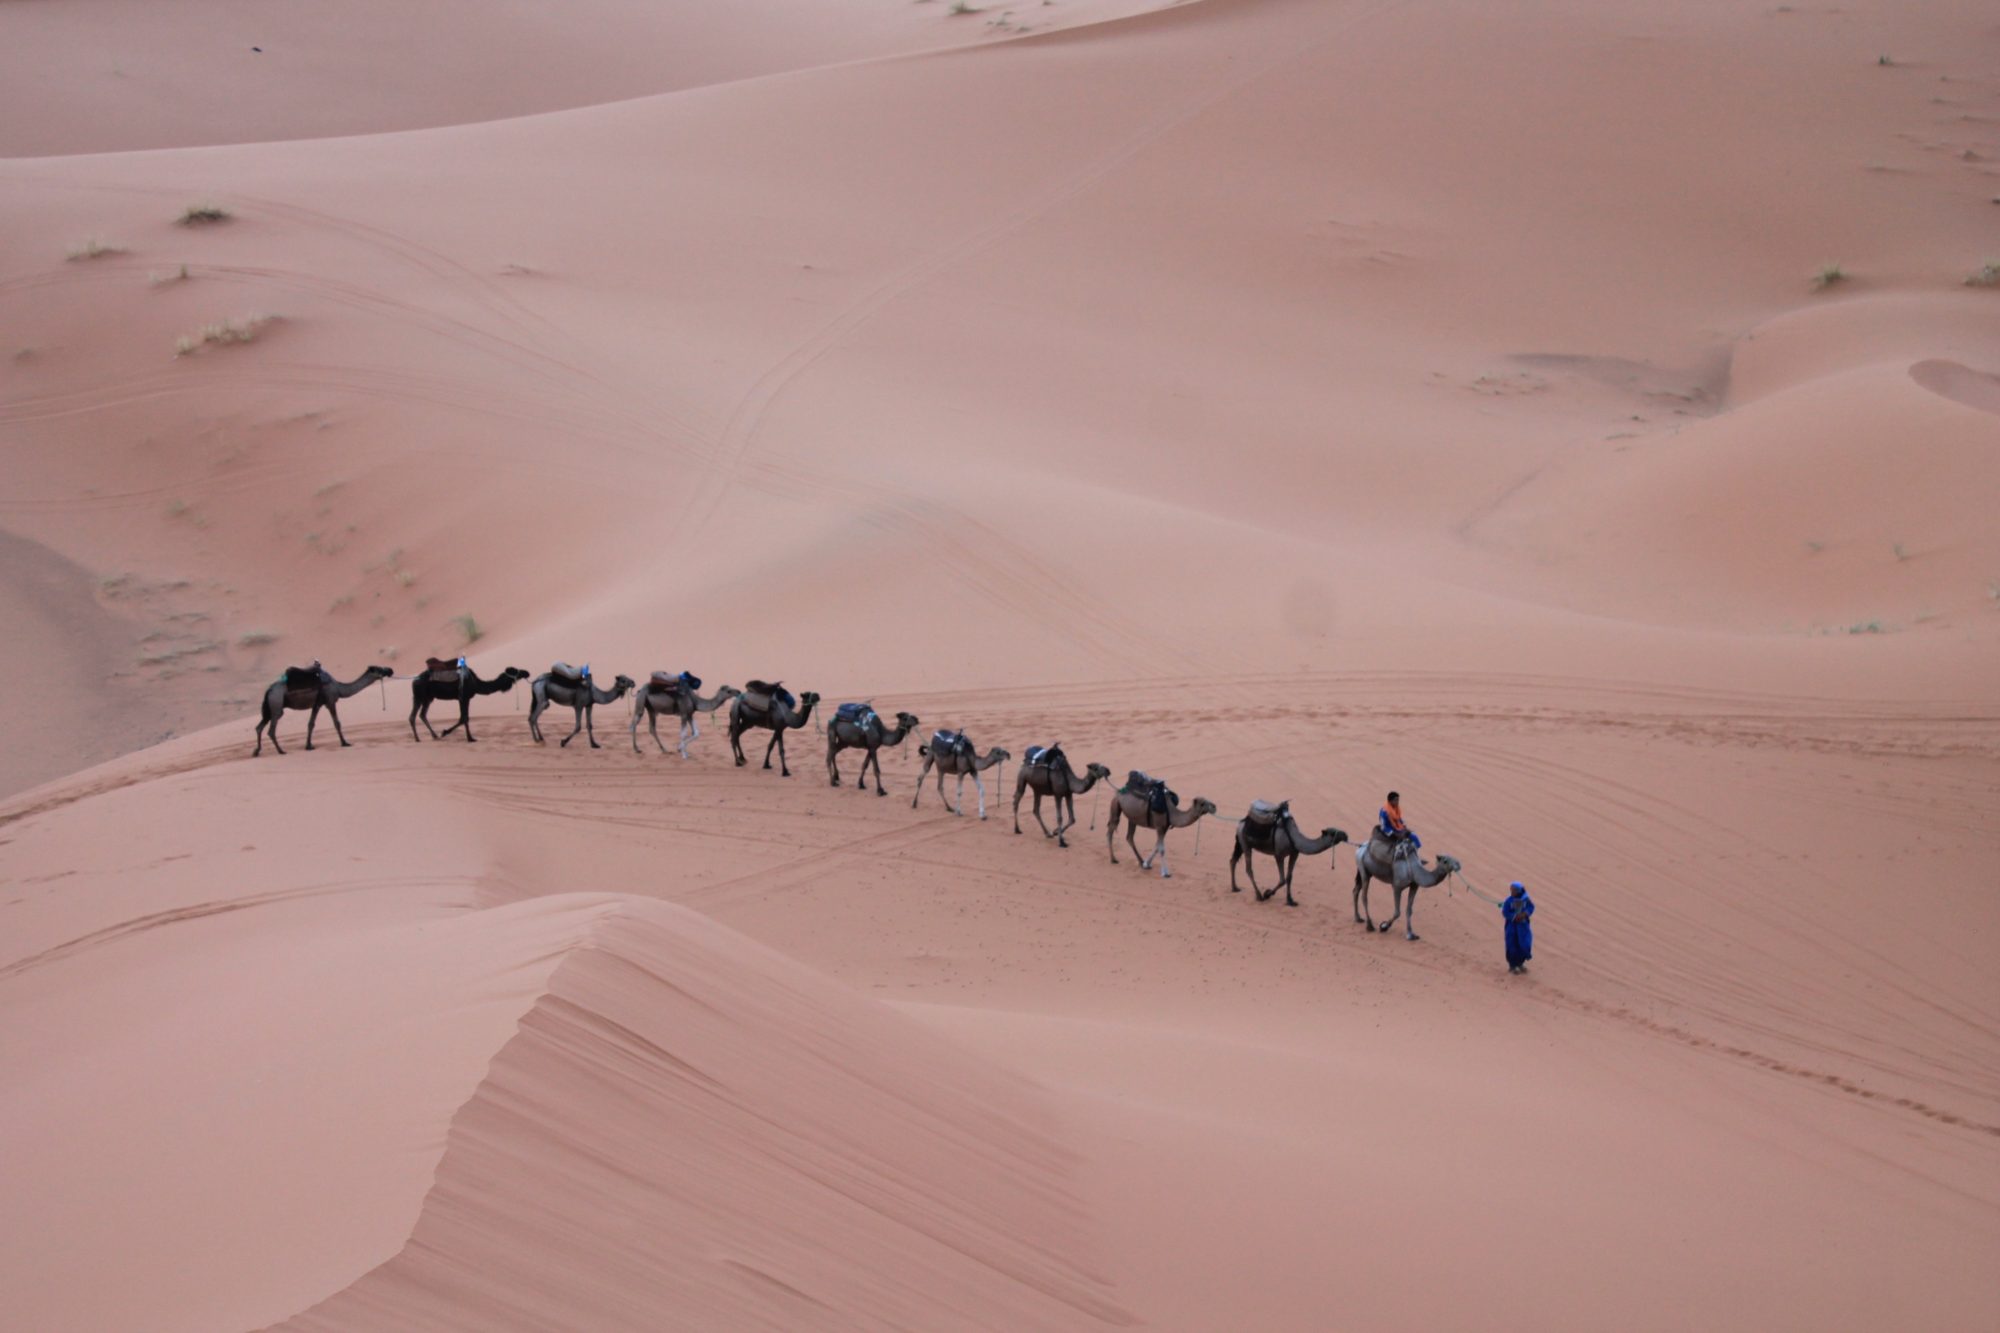 The Desert Sand Dunes, Marrakesh, Top Sights In Morocco You Need To See